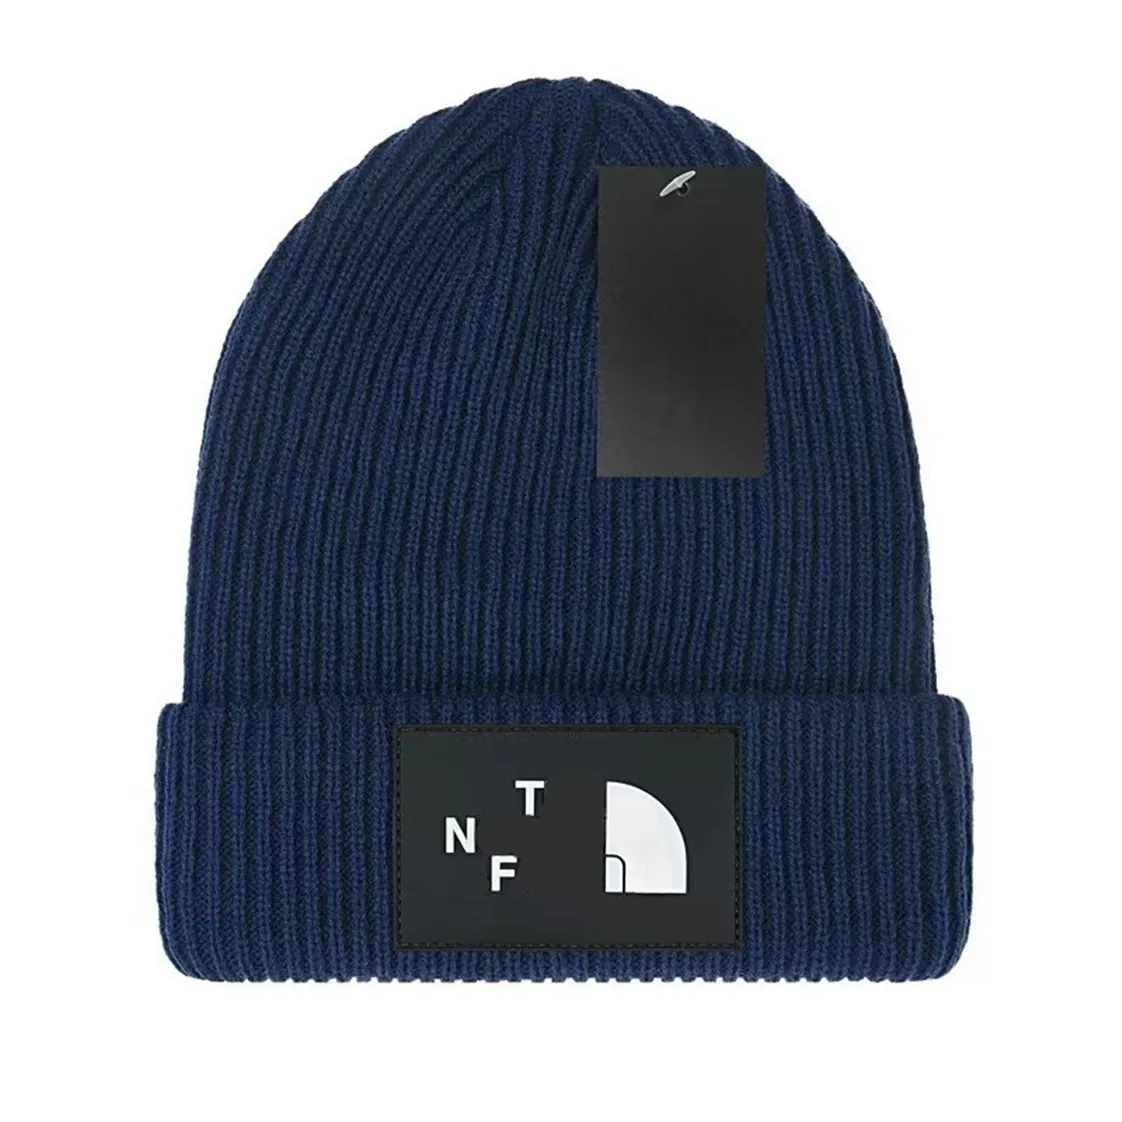 Beanie Fashion knitted cap men and women protection windproof wool cap fall and winter high quality outdoor warm brimless penny cap F-4